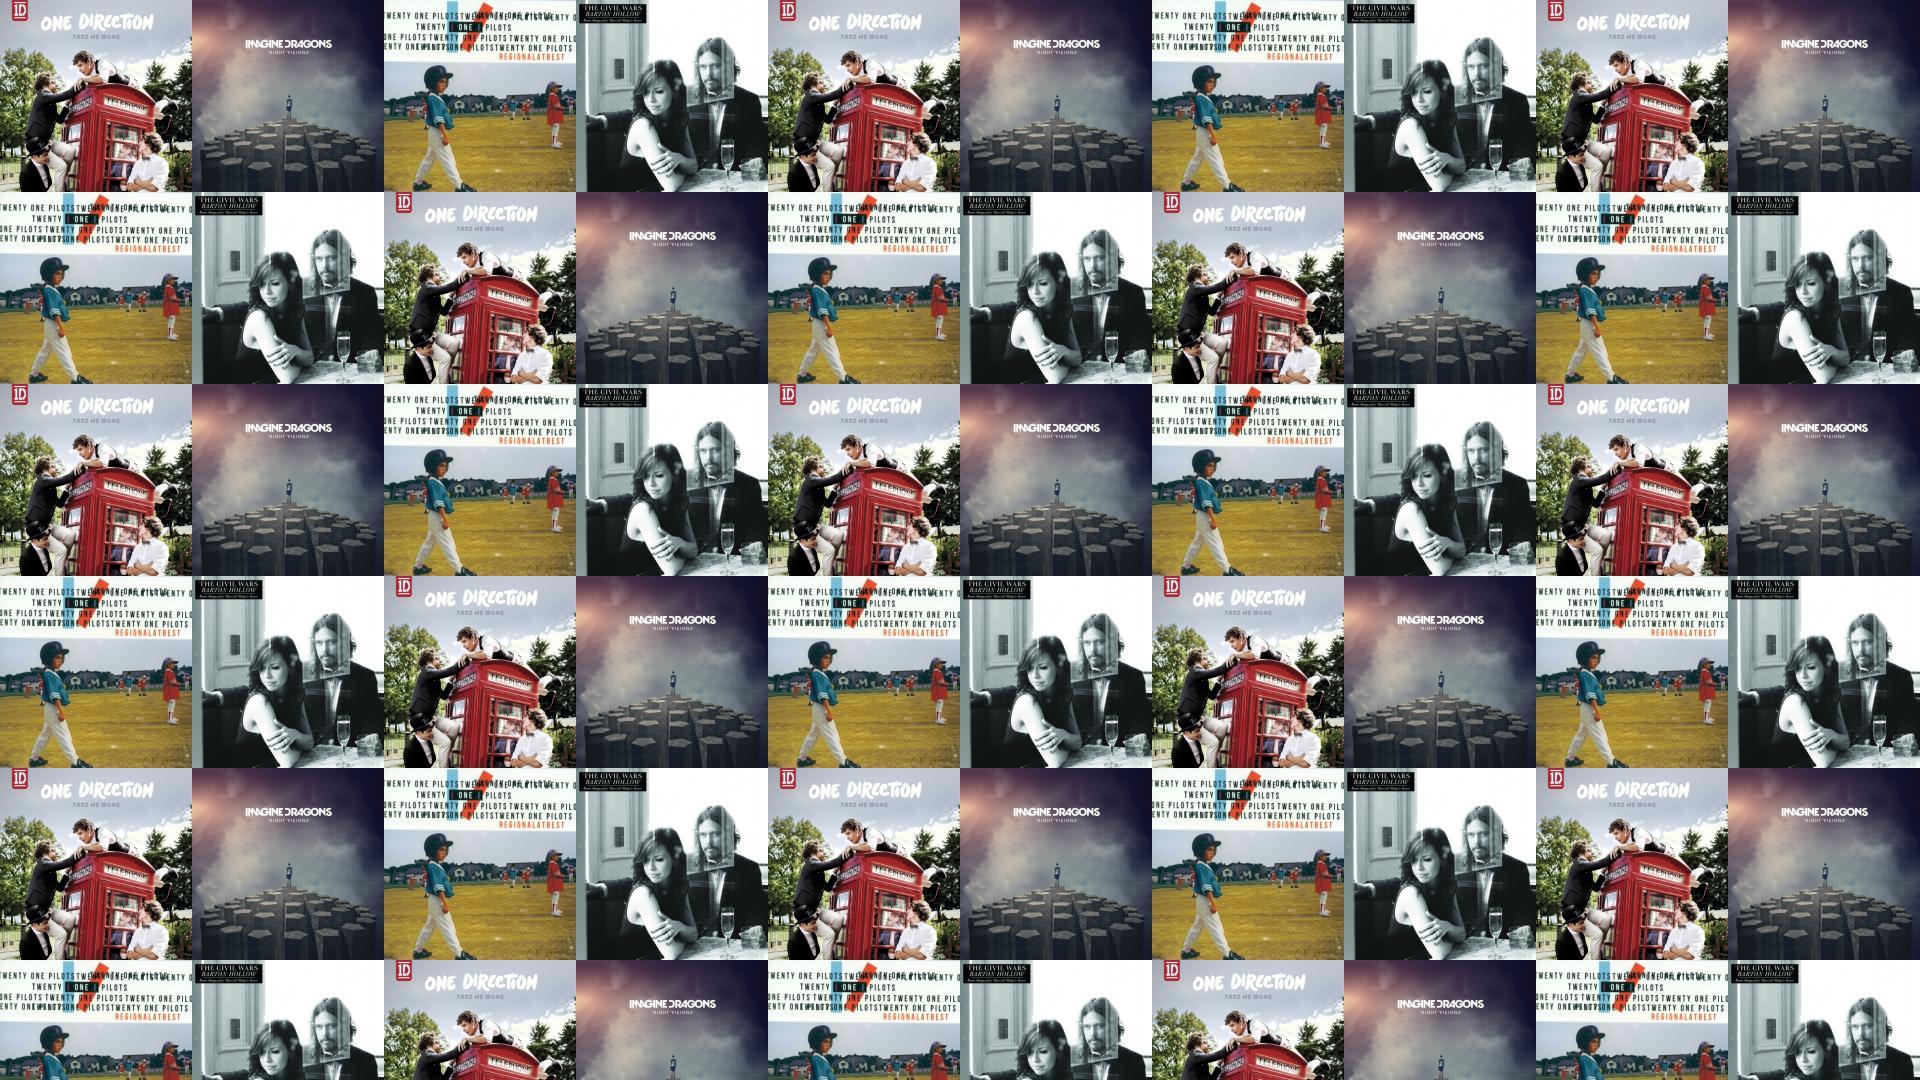 One Direction Wallpaper Take Me Home. One Direction Photo